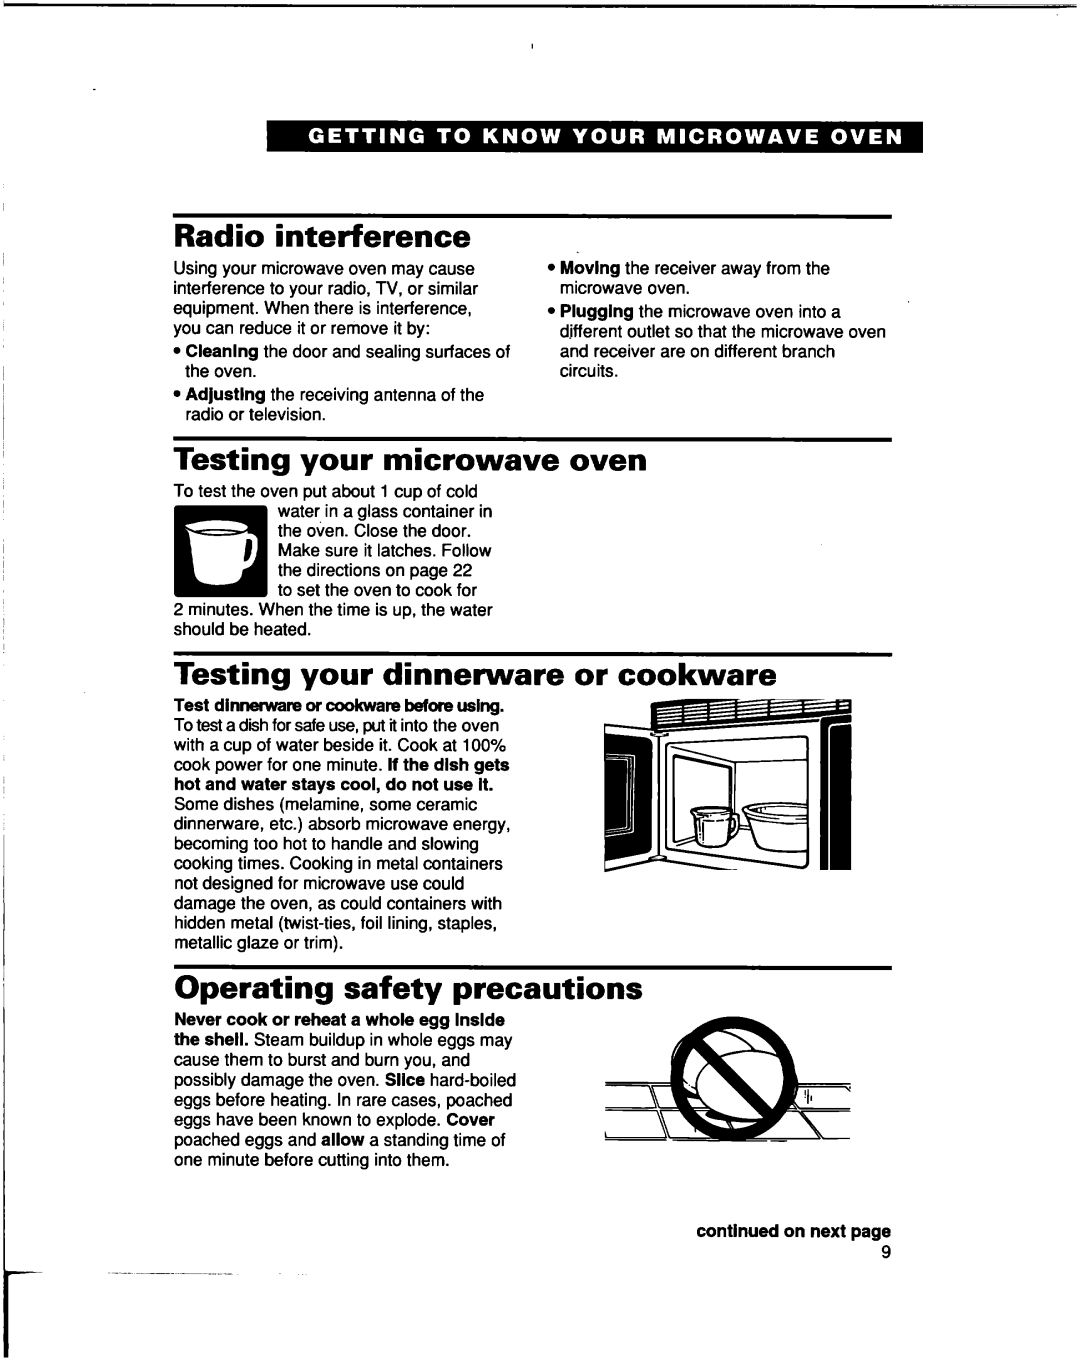 Whirlpool lREB/Q warranty Radio interference, Testing your microwave oven, Testing your dinnerware or cookware 